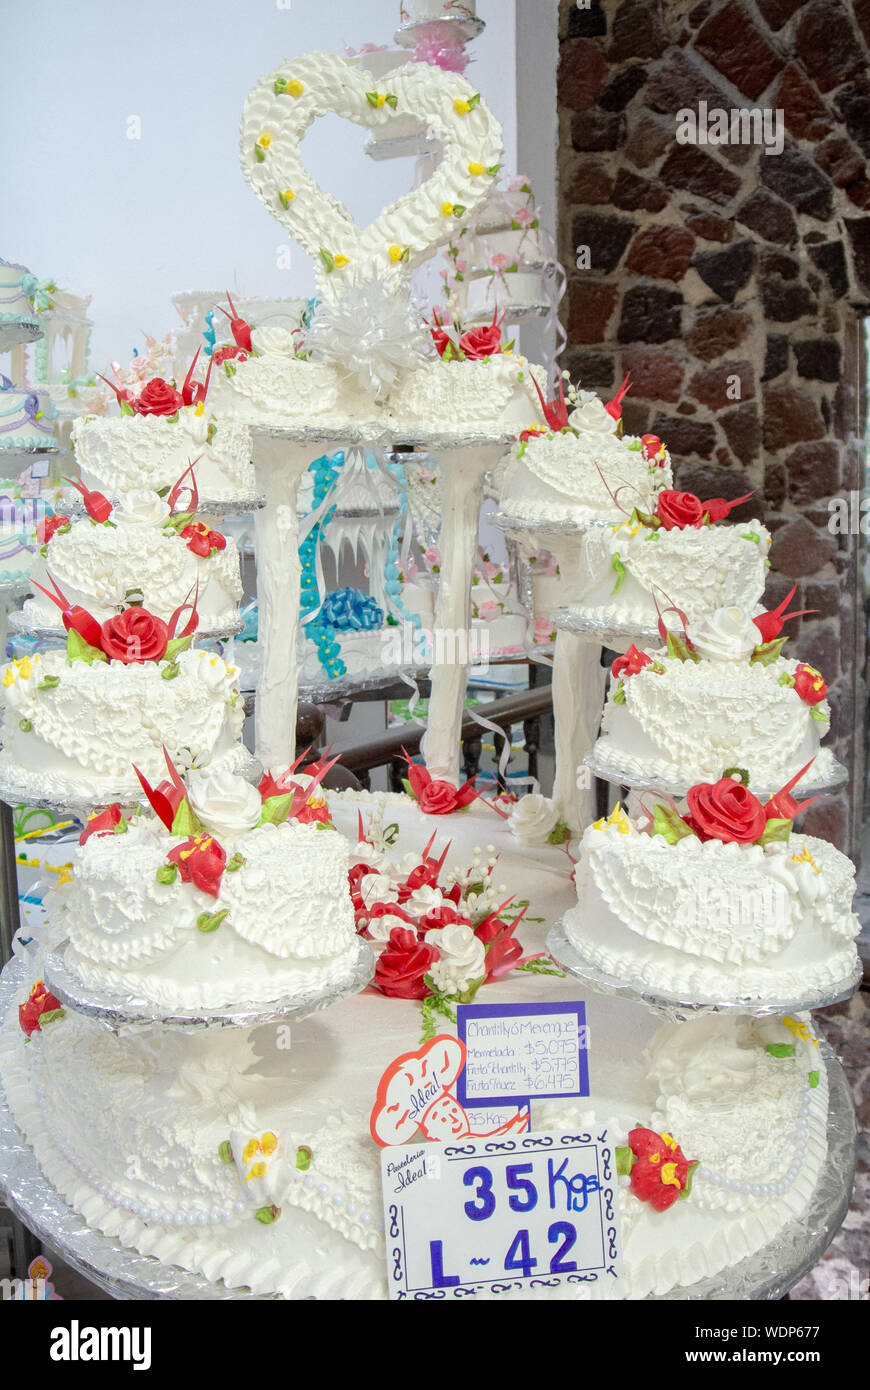 White wedding cakes with red rose at PAS ELERIA IDEAL, a local bakery, mexico city, mexico Stock Photo